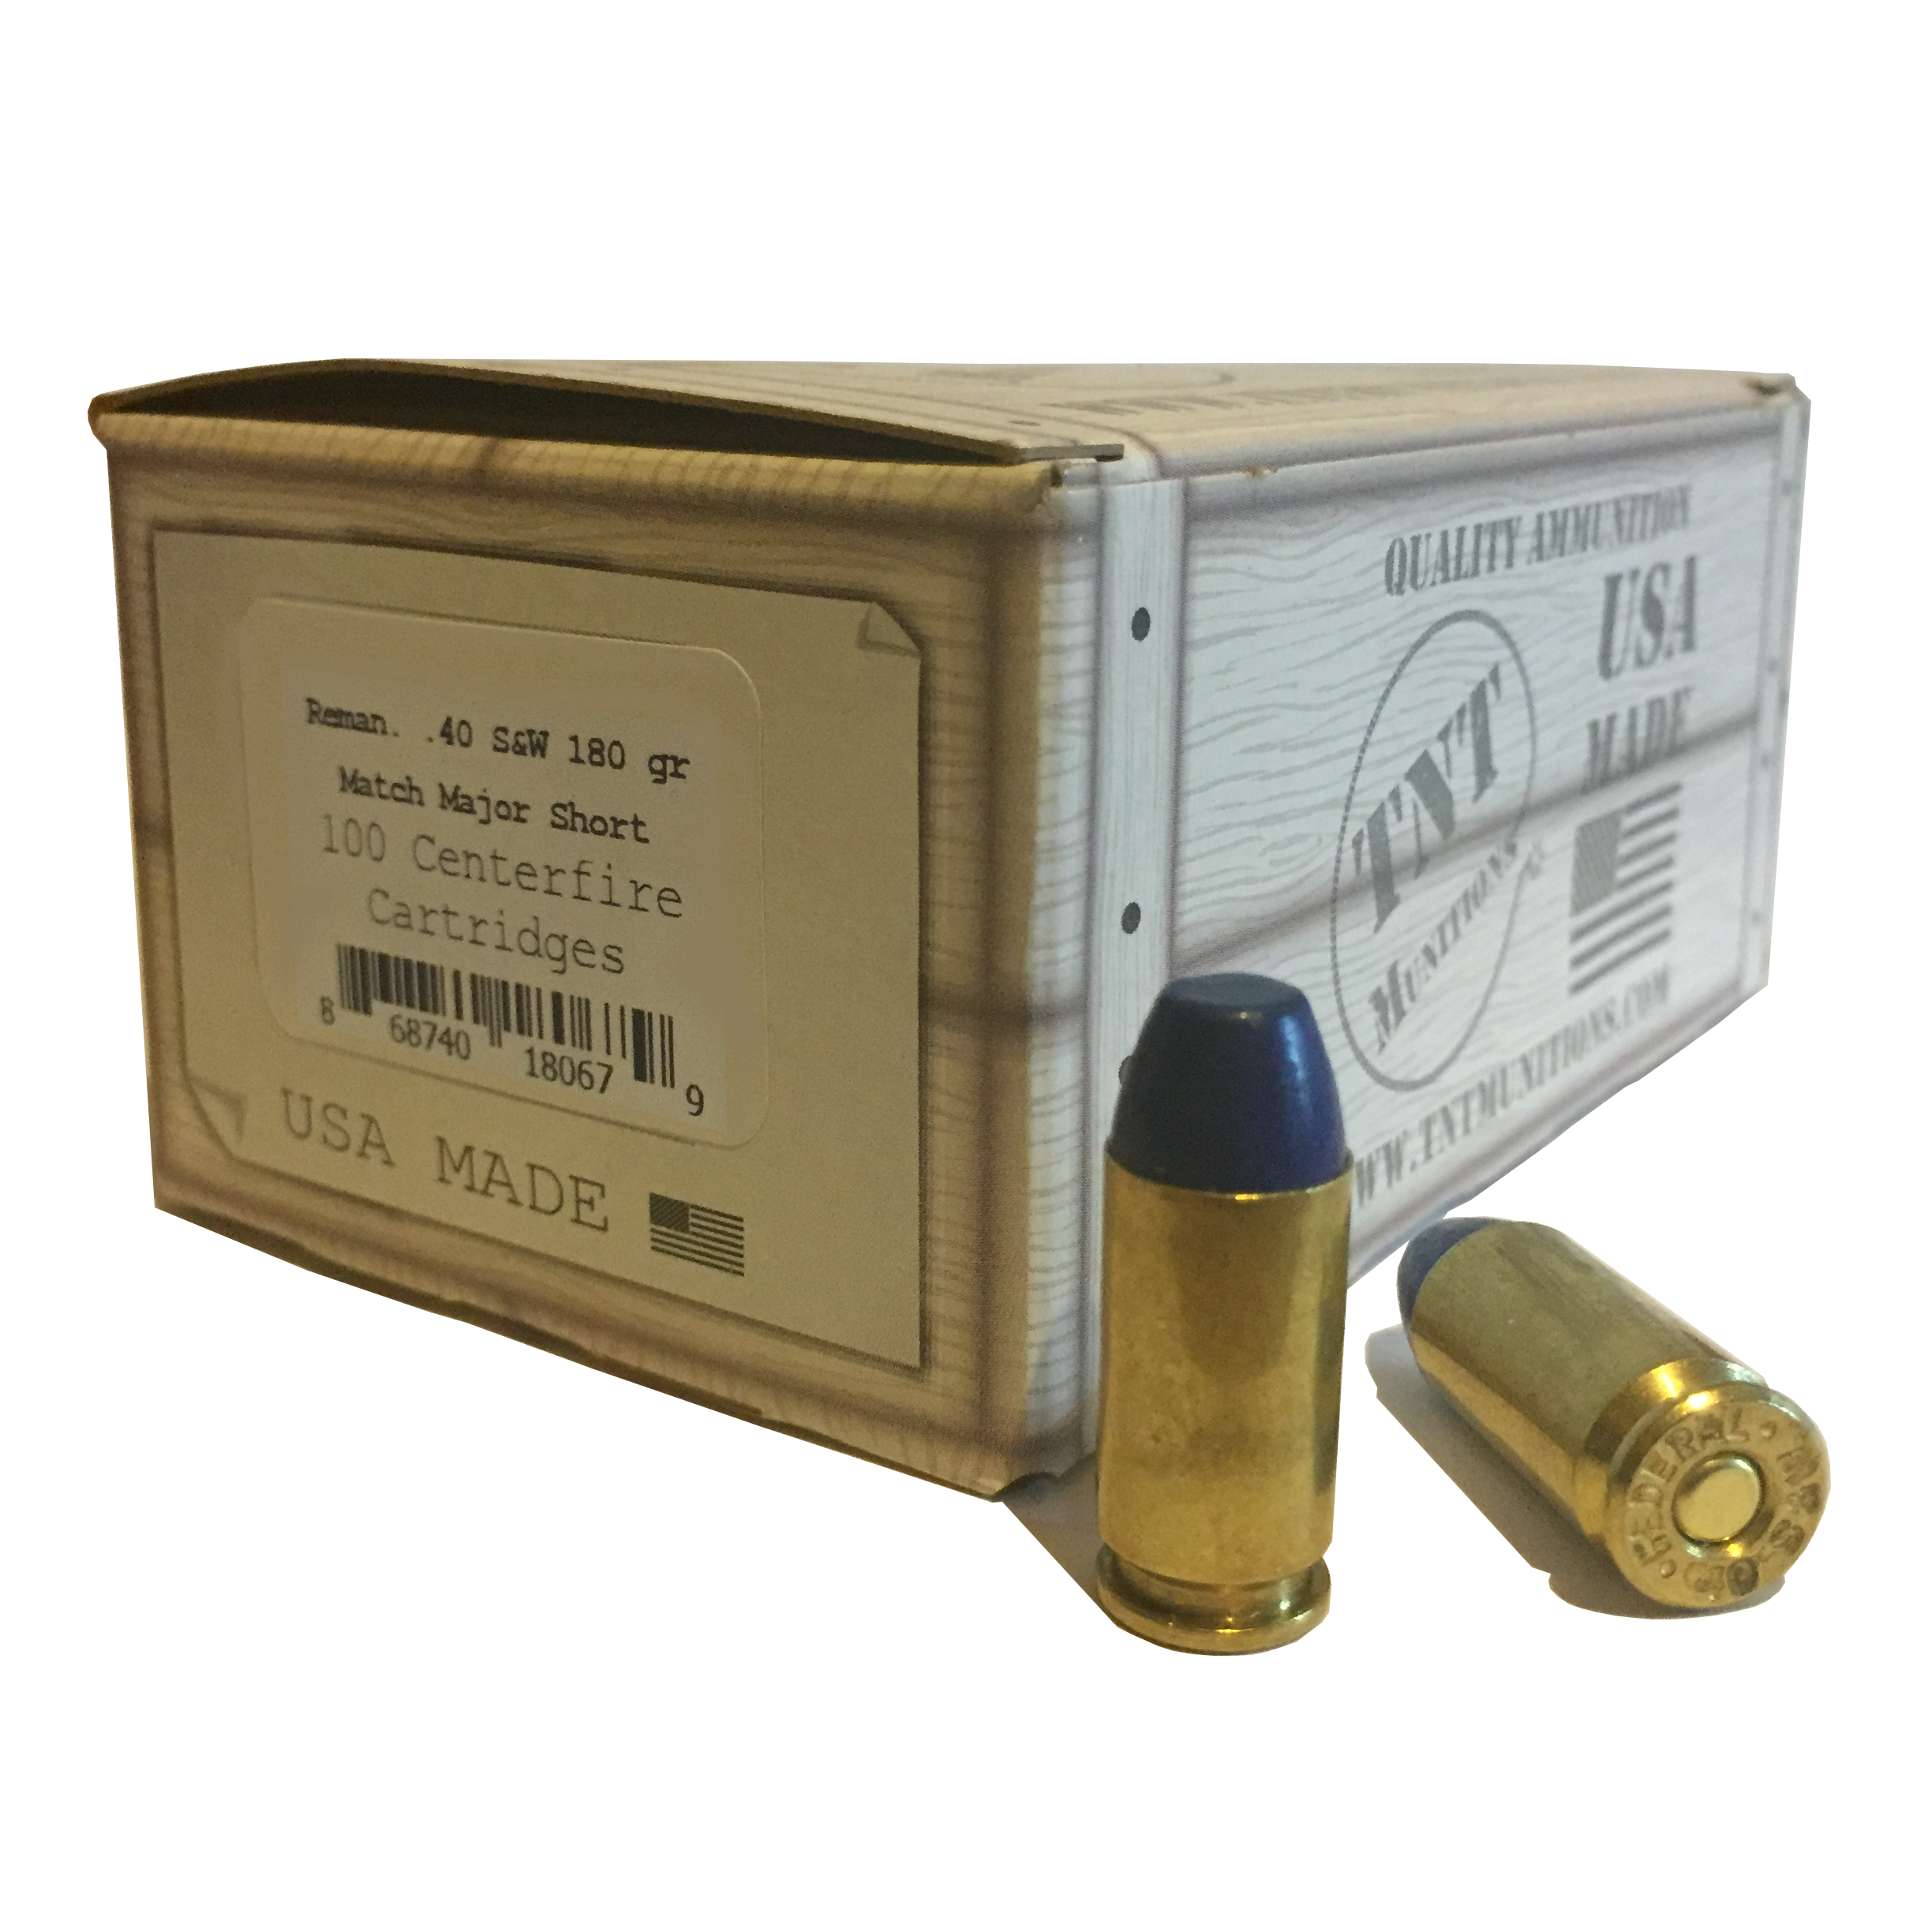 .40 S&W 180 gr. RNFP Match Major Short. MEMORIAL DAY SALE! THROUGH MAY 29TH ONLY - SHIPS NBD